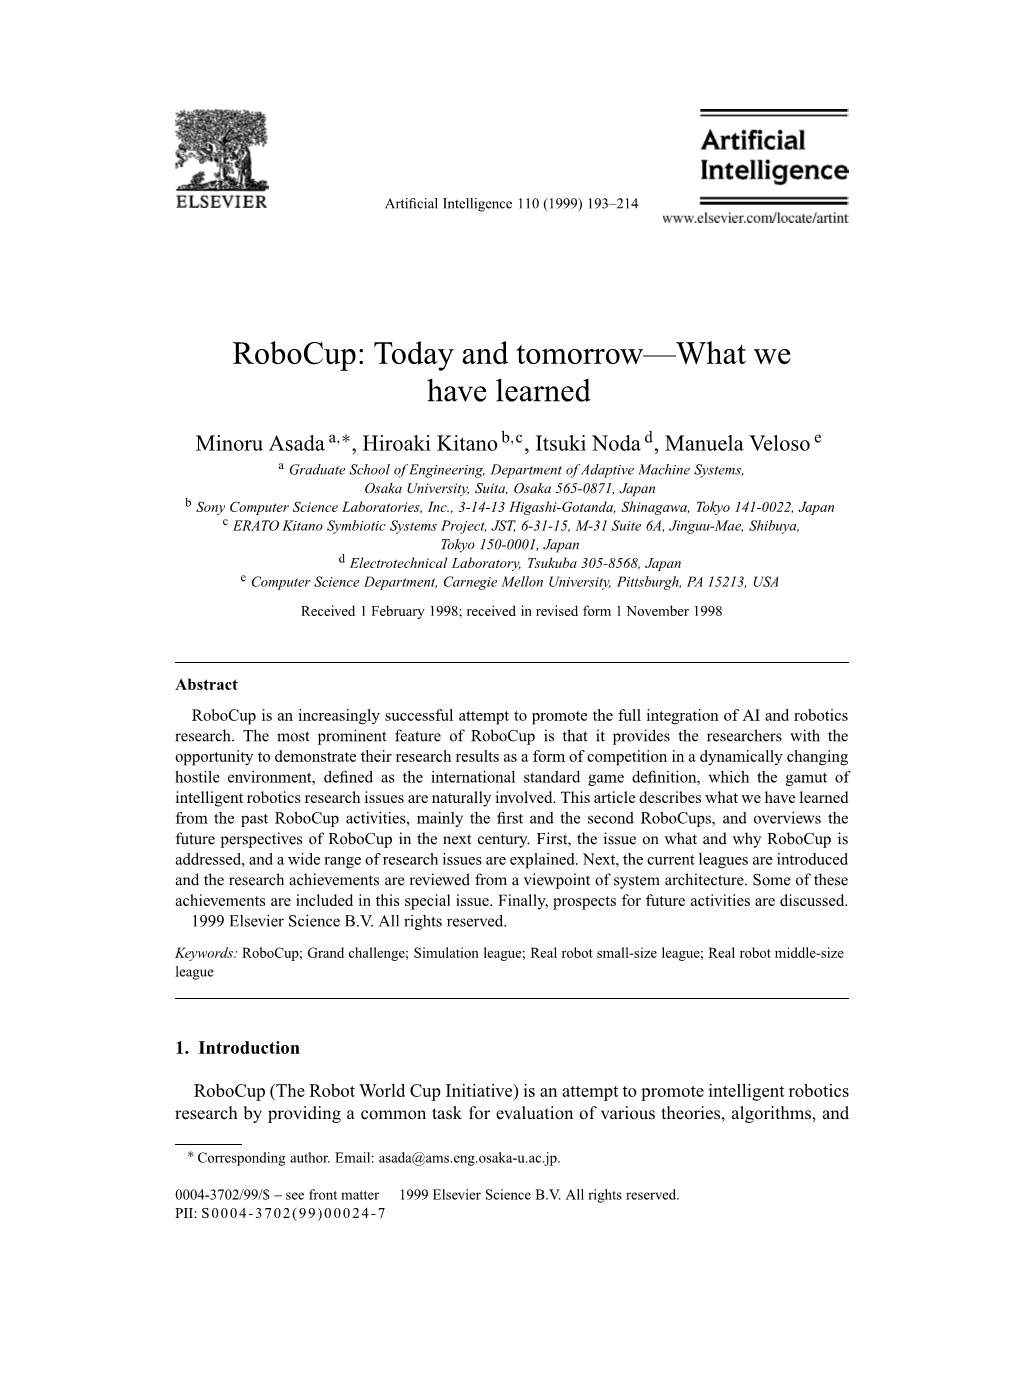 Robocup: Today and Tomorrow—What We Have Learned